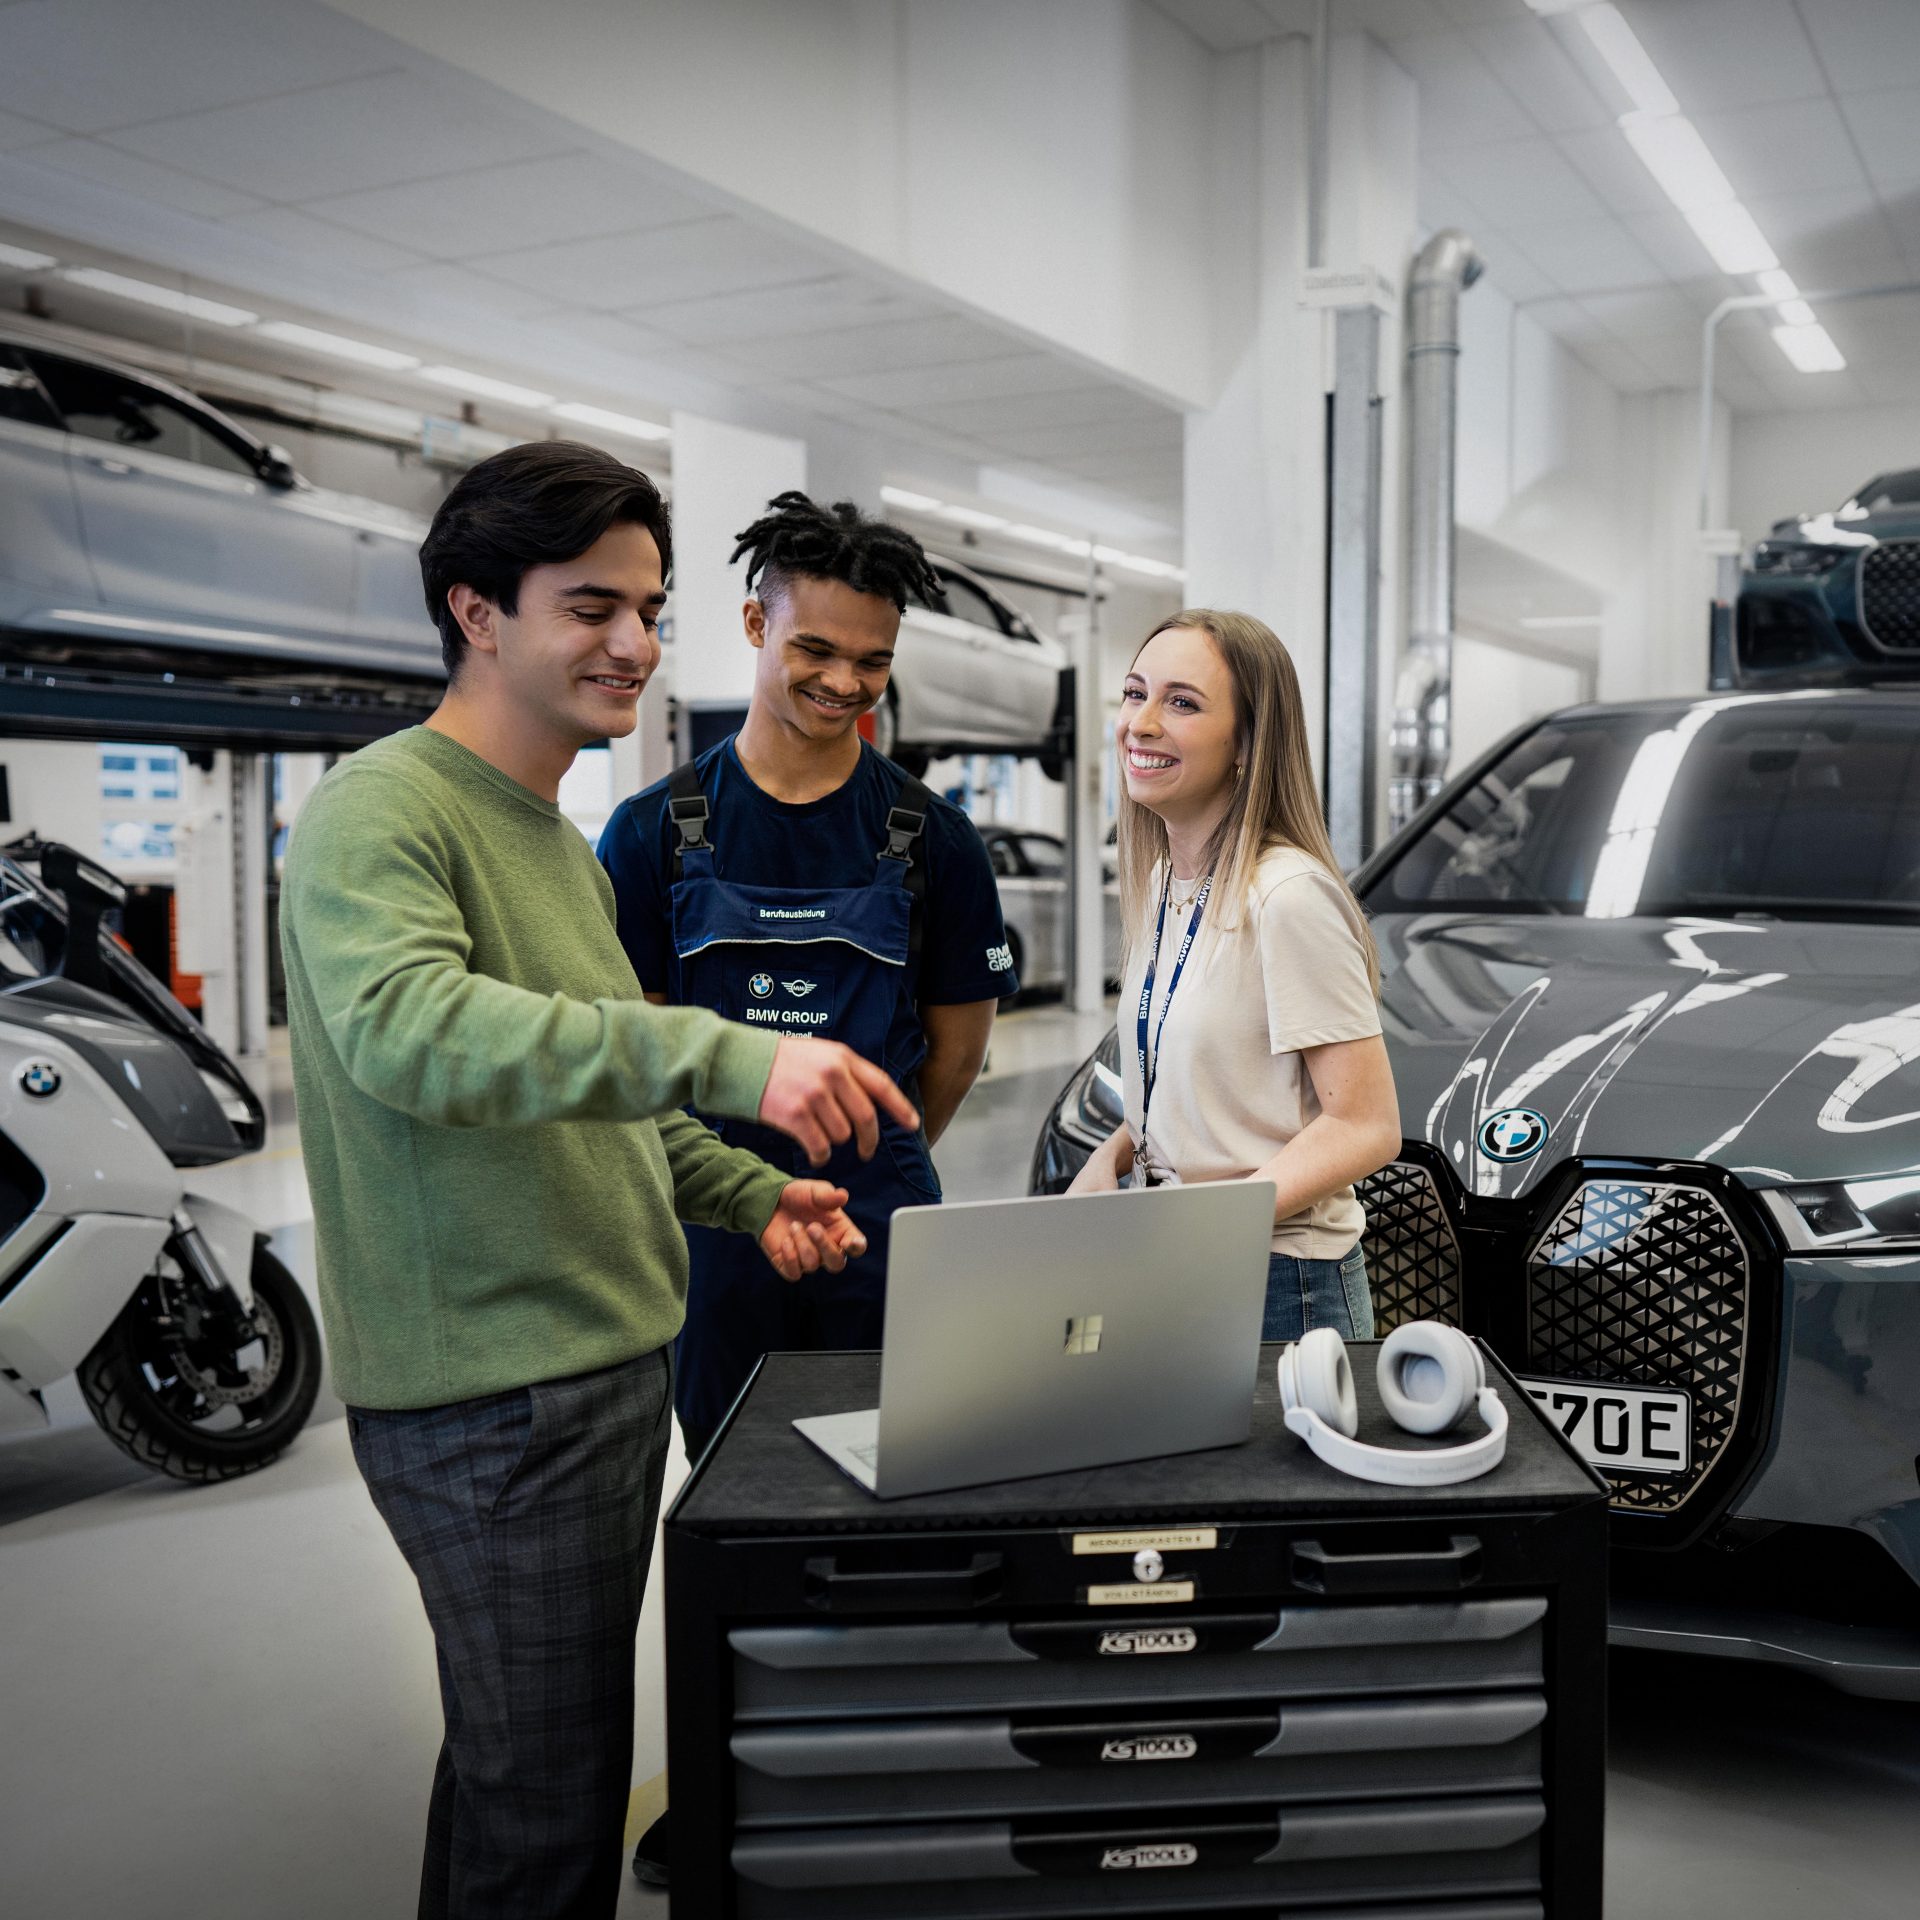 The picture shows three apprentices at work in a BMW workshop.